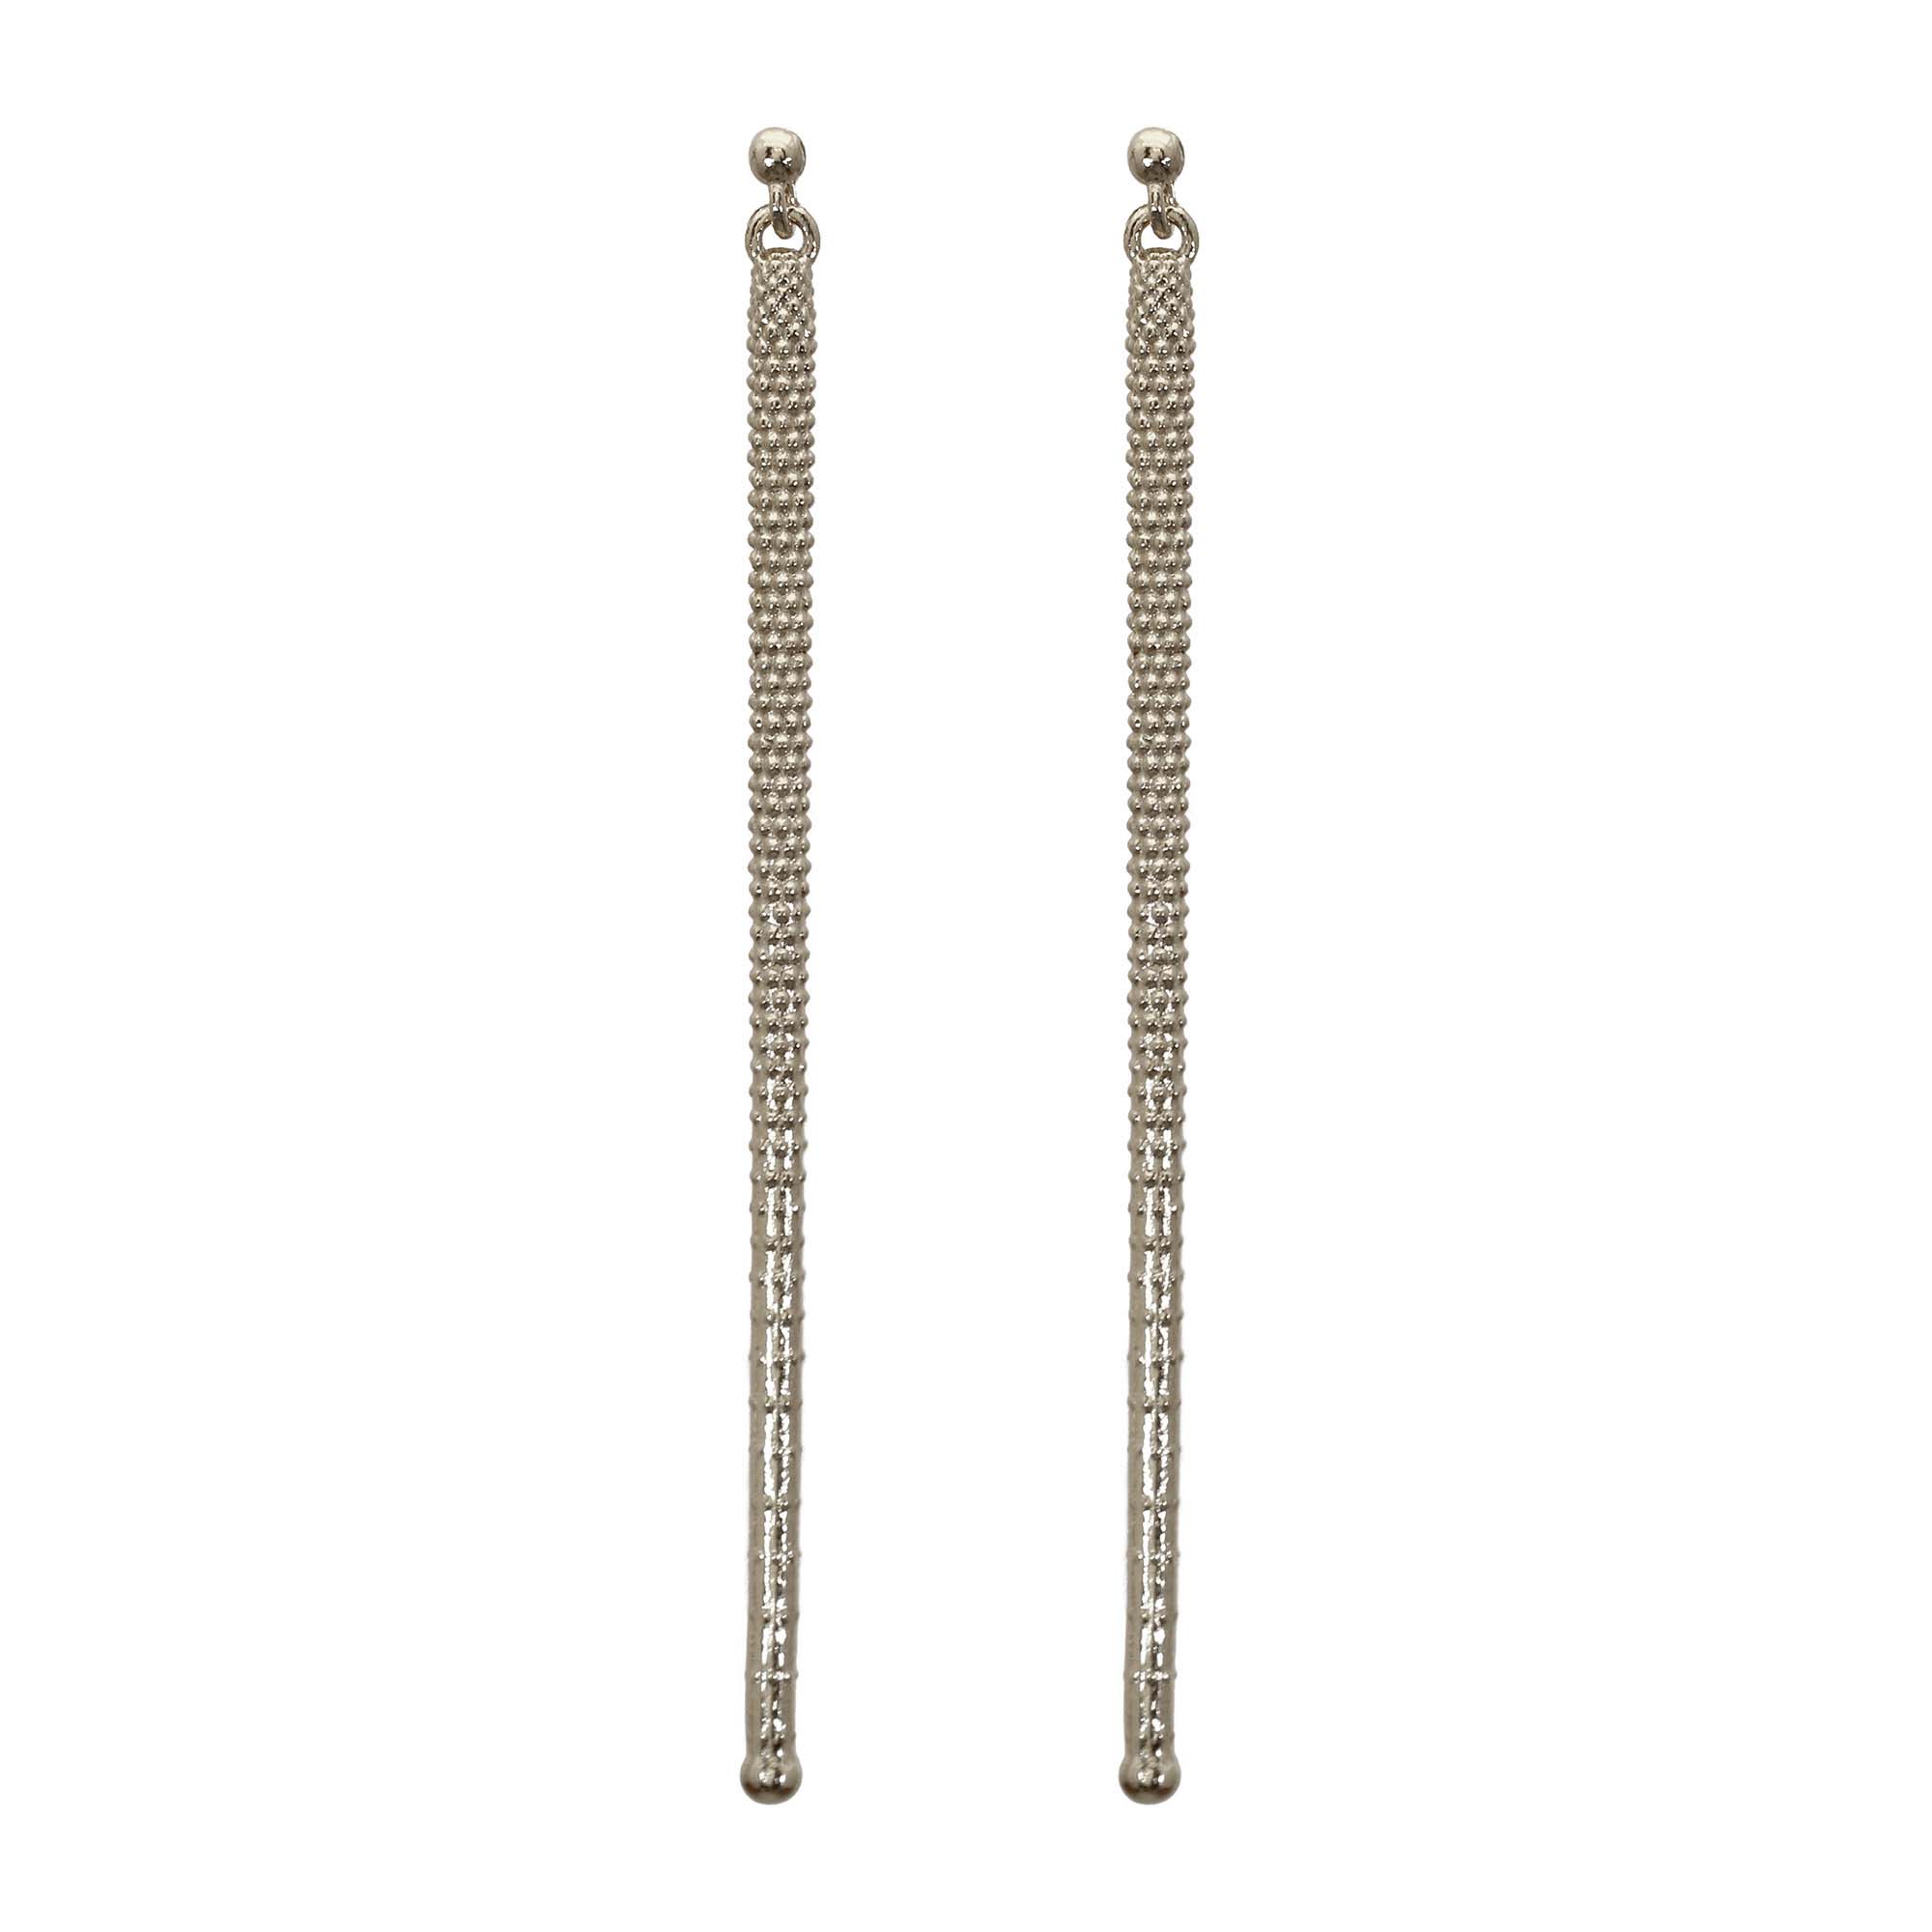 Lava Sterling Silver Linear Drop Earrings with lava texture